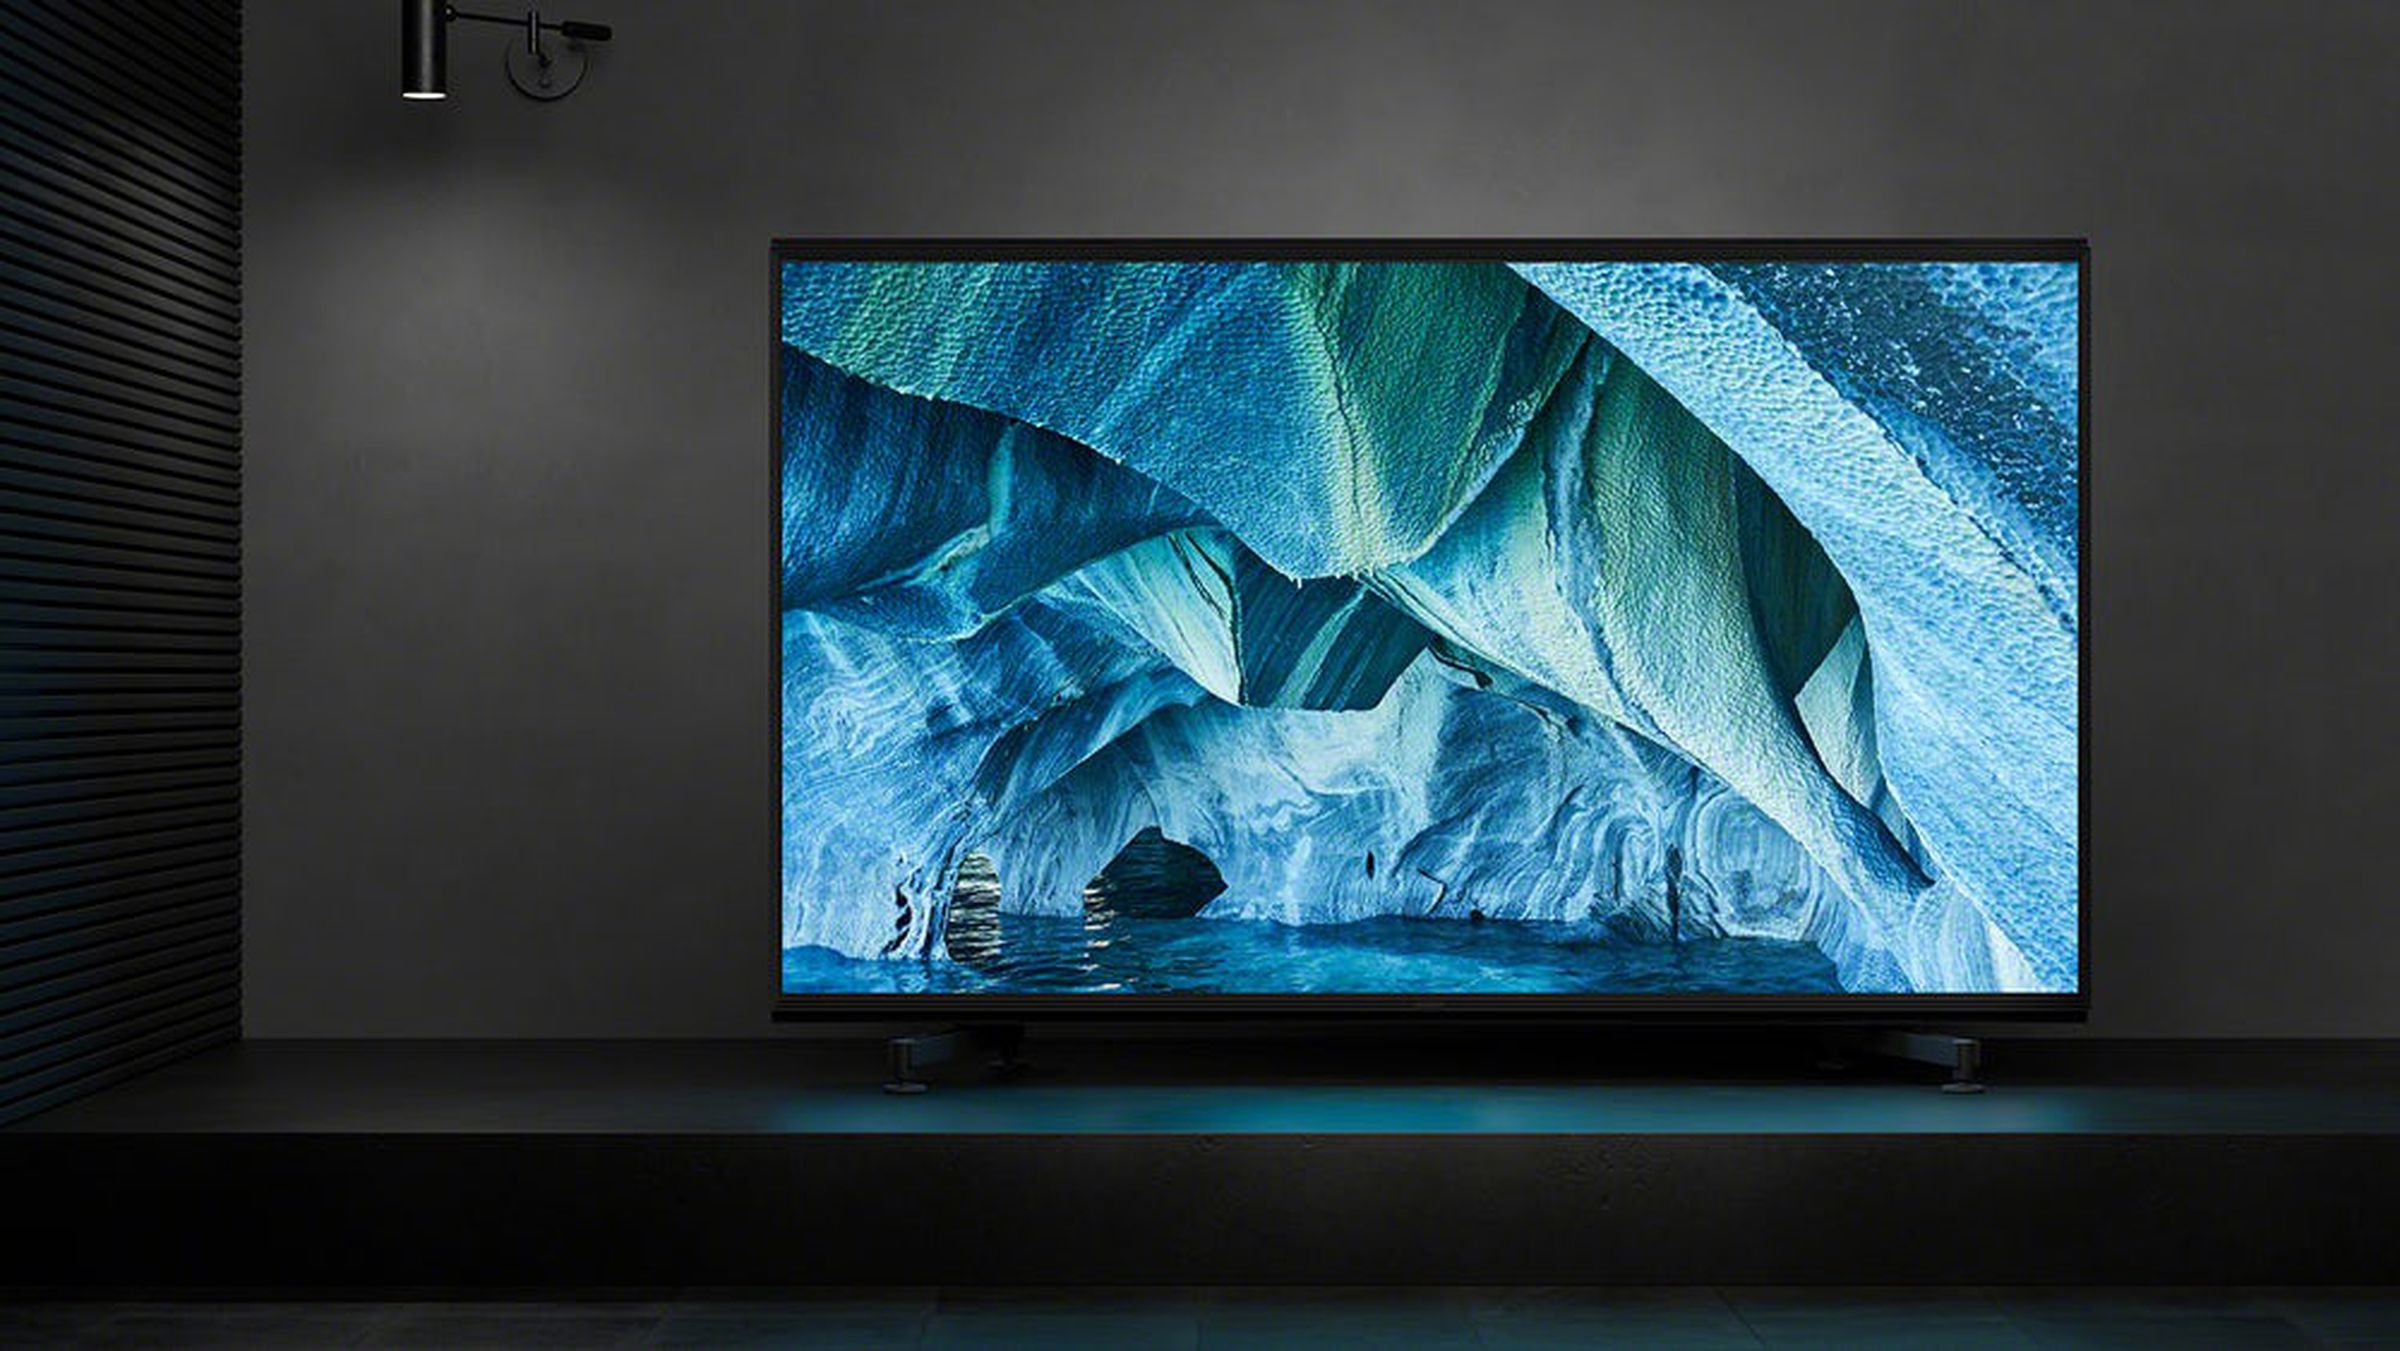 The Sony Z9G is the company’s first 8K TV and will be available in 85-inch and 98-inch variants.